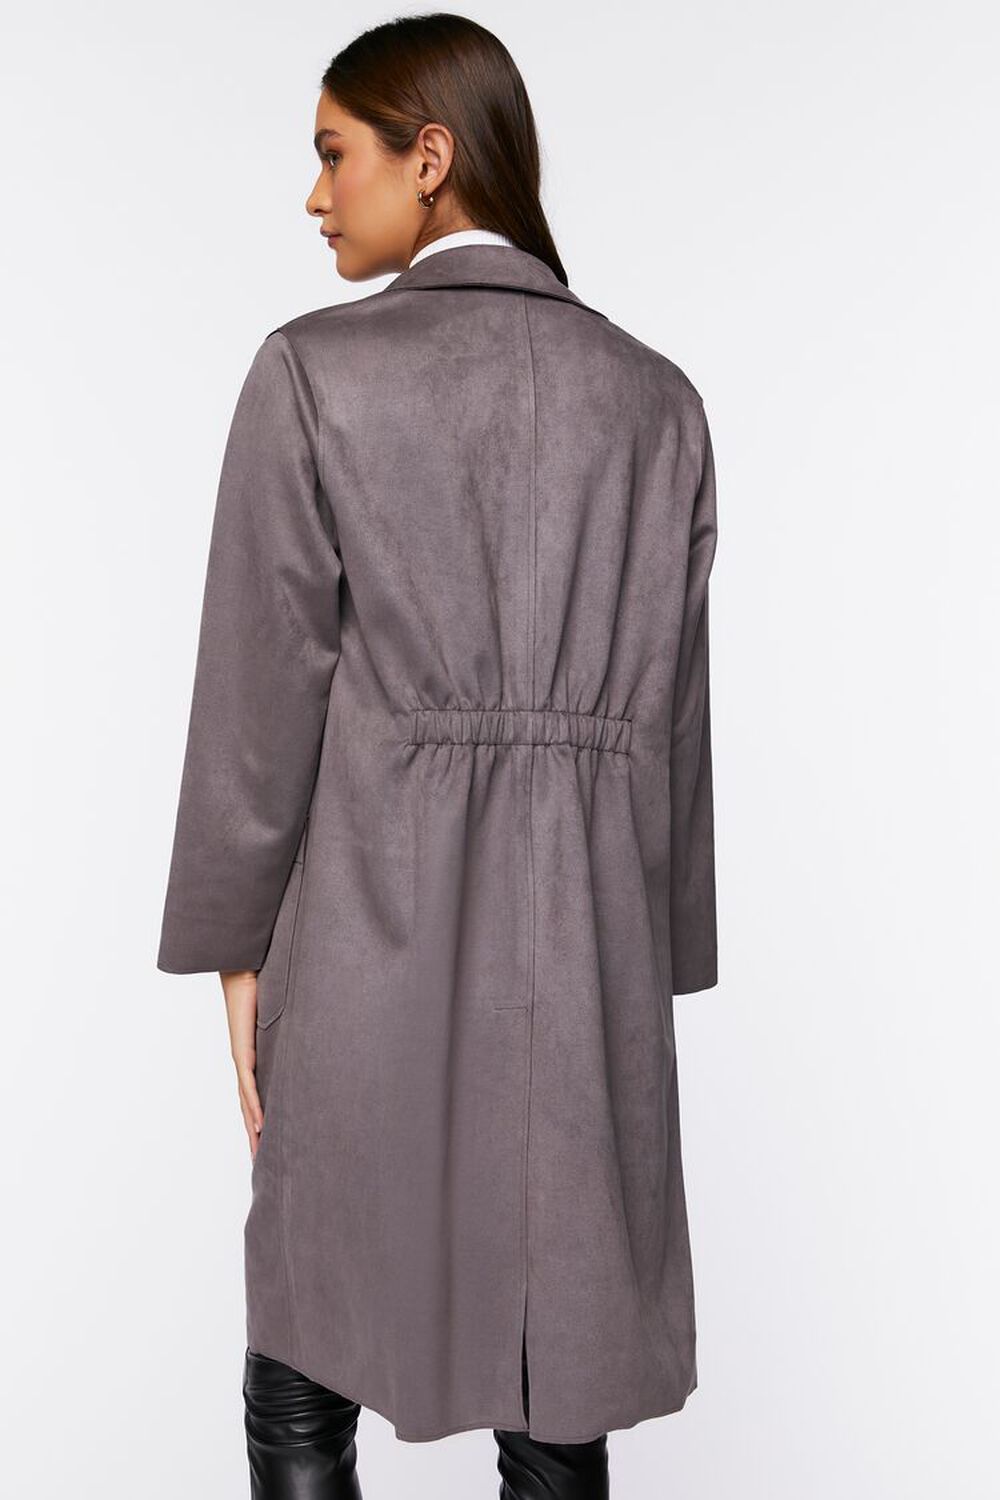 STEEPLE GREY Faux Suede Button-Front Duster Coat, image 3